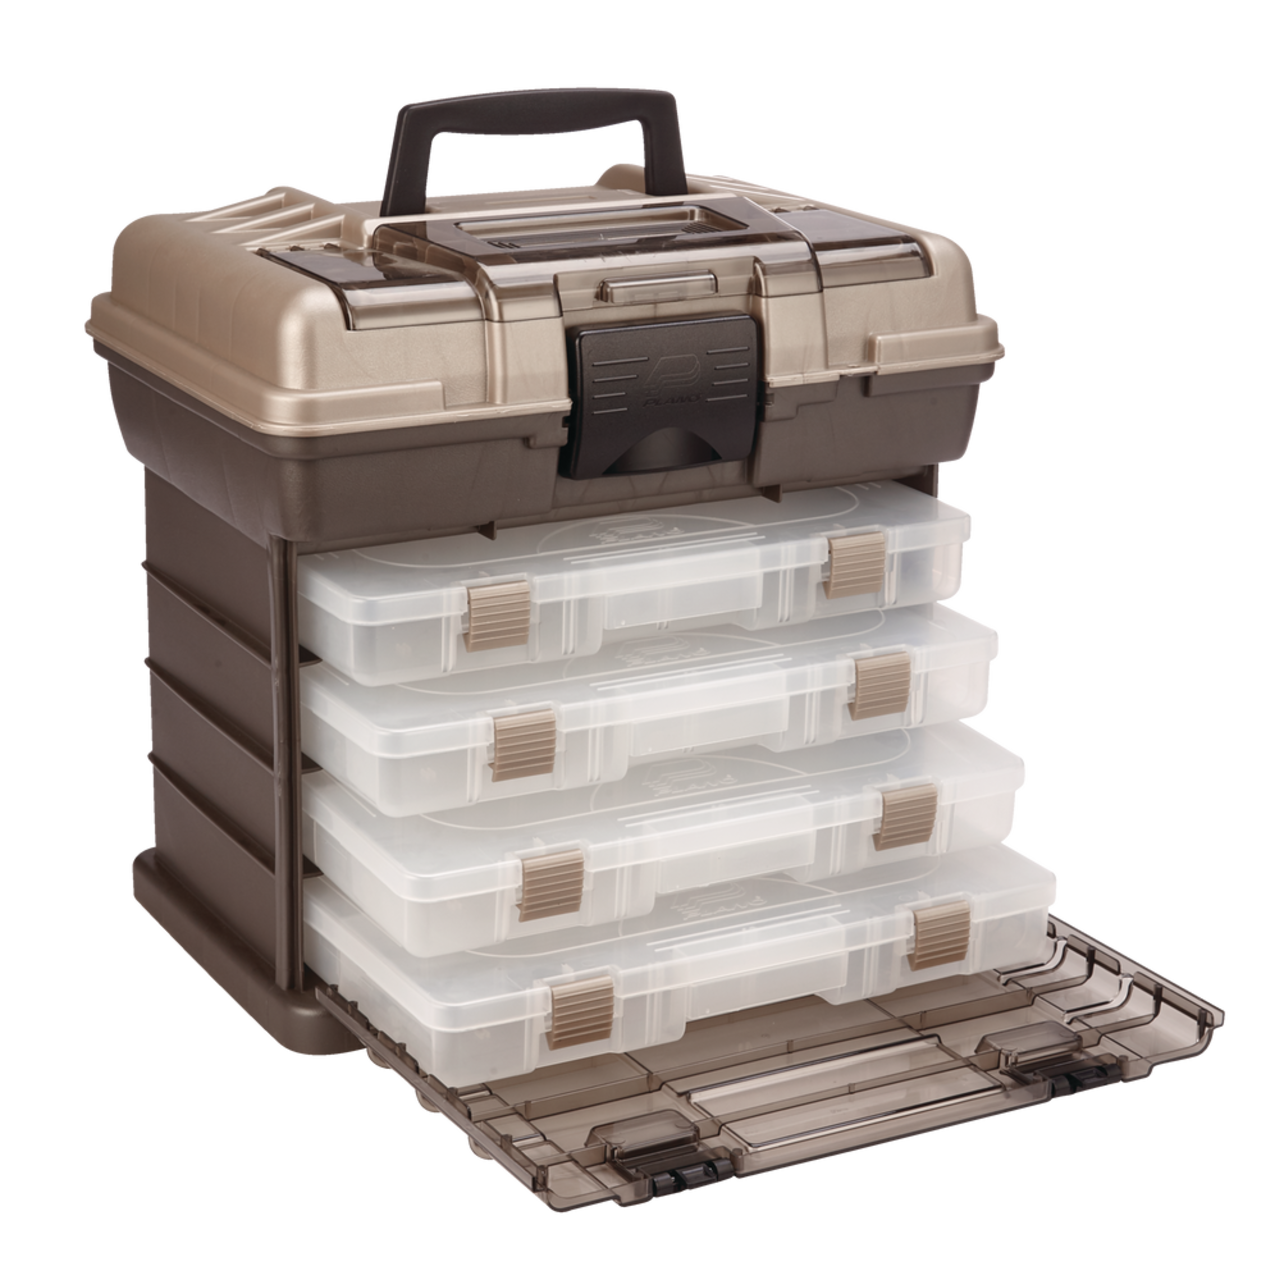 Plano 137401 Guide Series StowAway Rack Tackle Box System